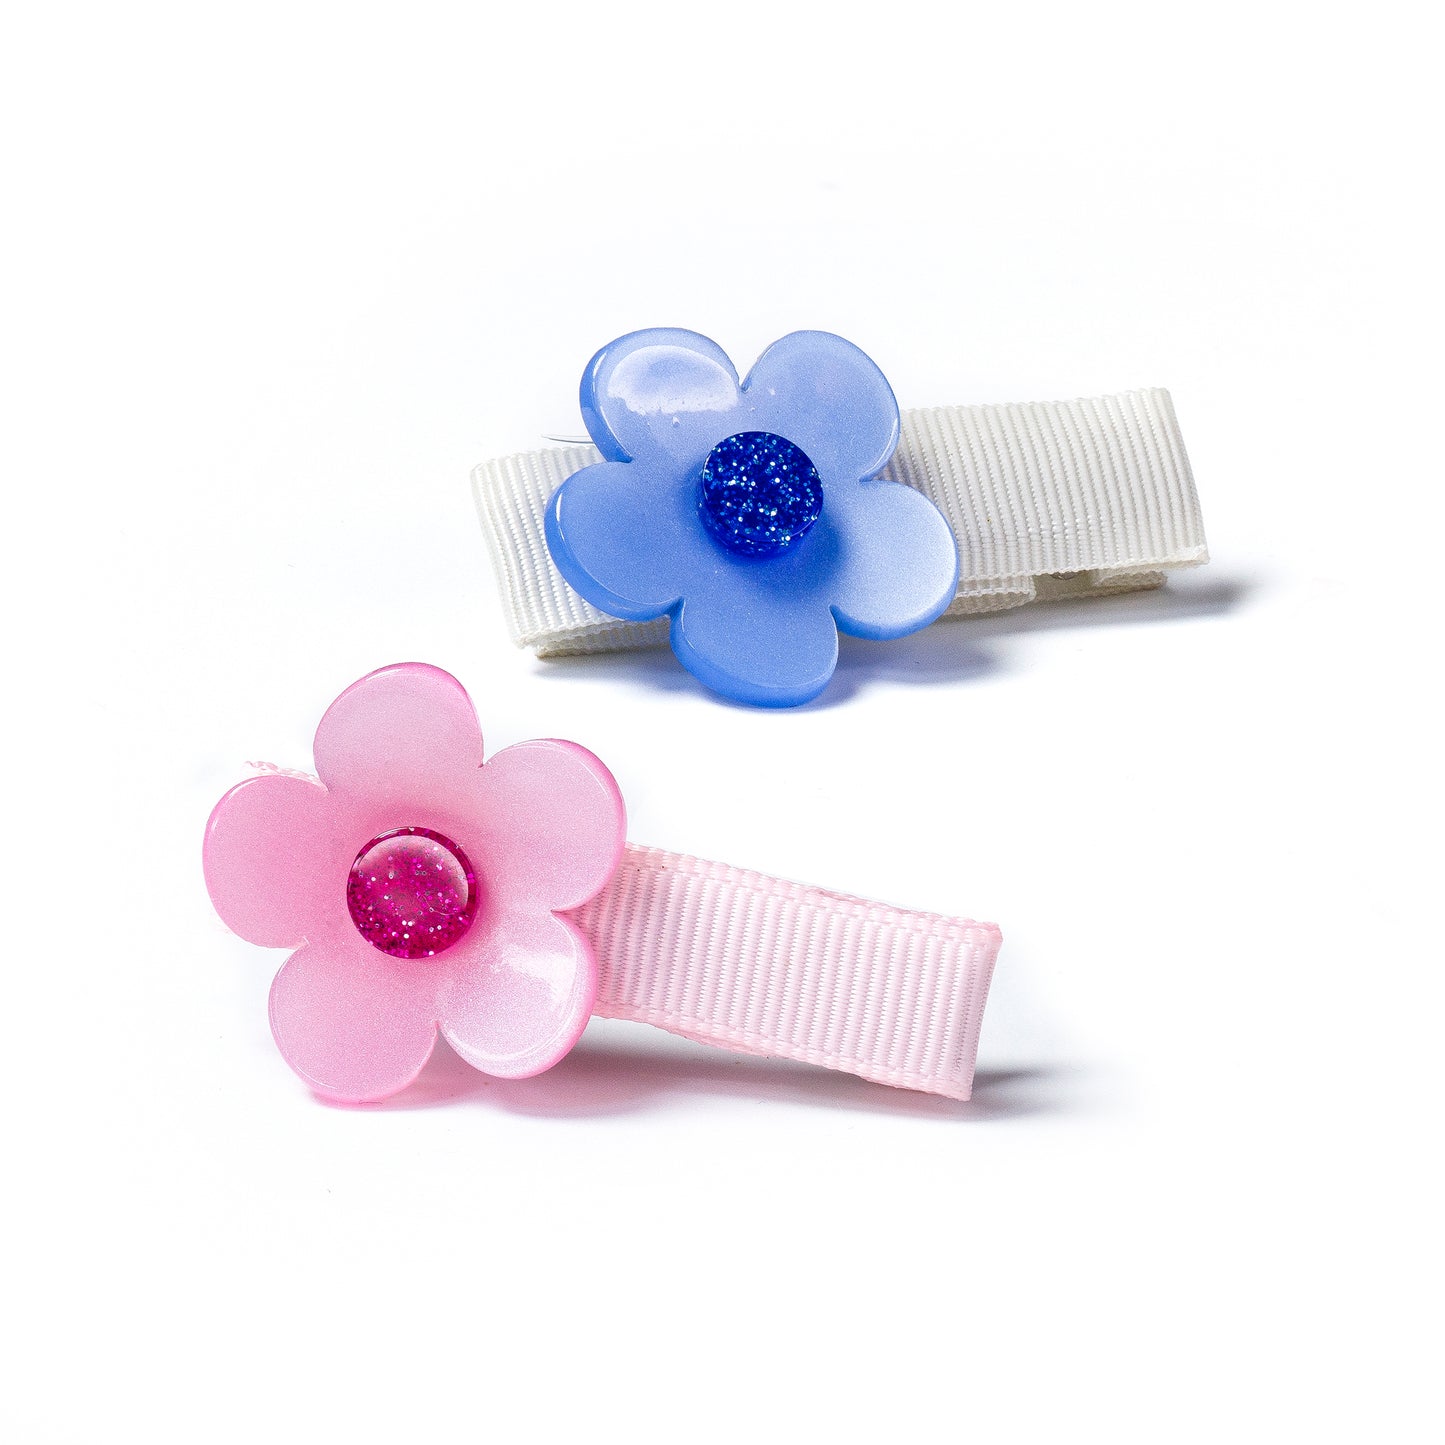 SPR24- Flower Vania Baby in Satin Blue and Light Pink Hair Clips